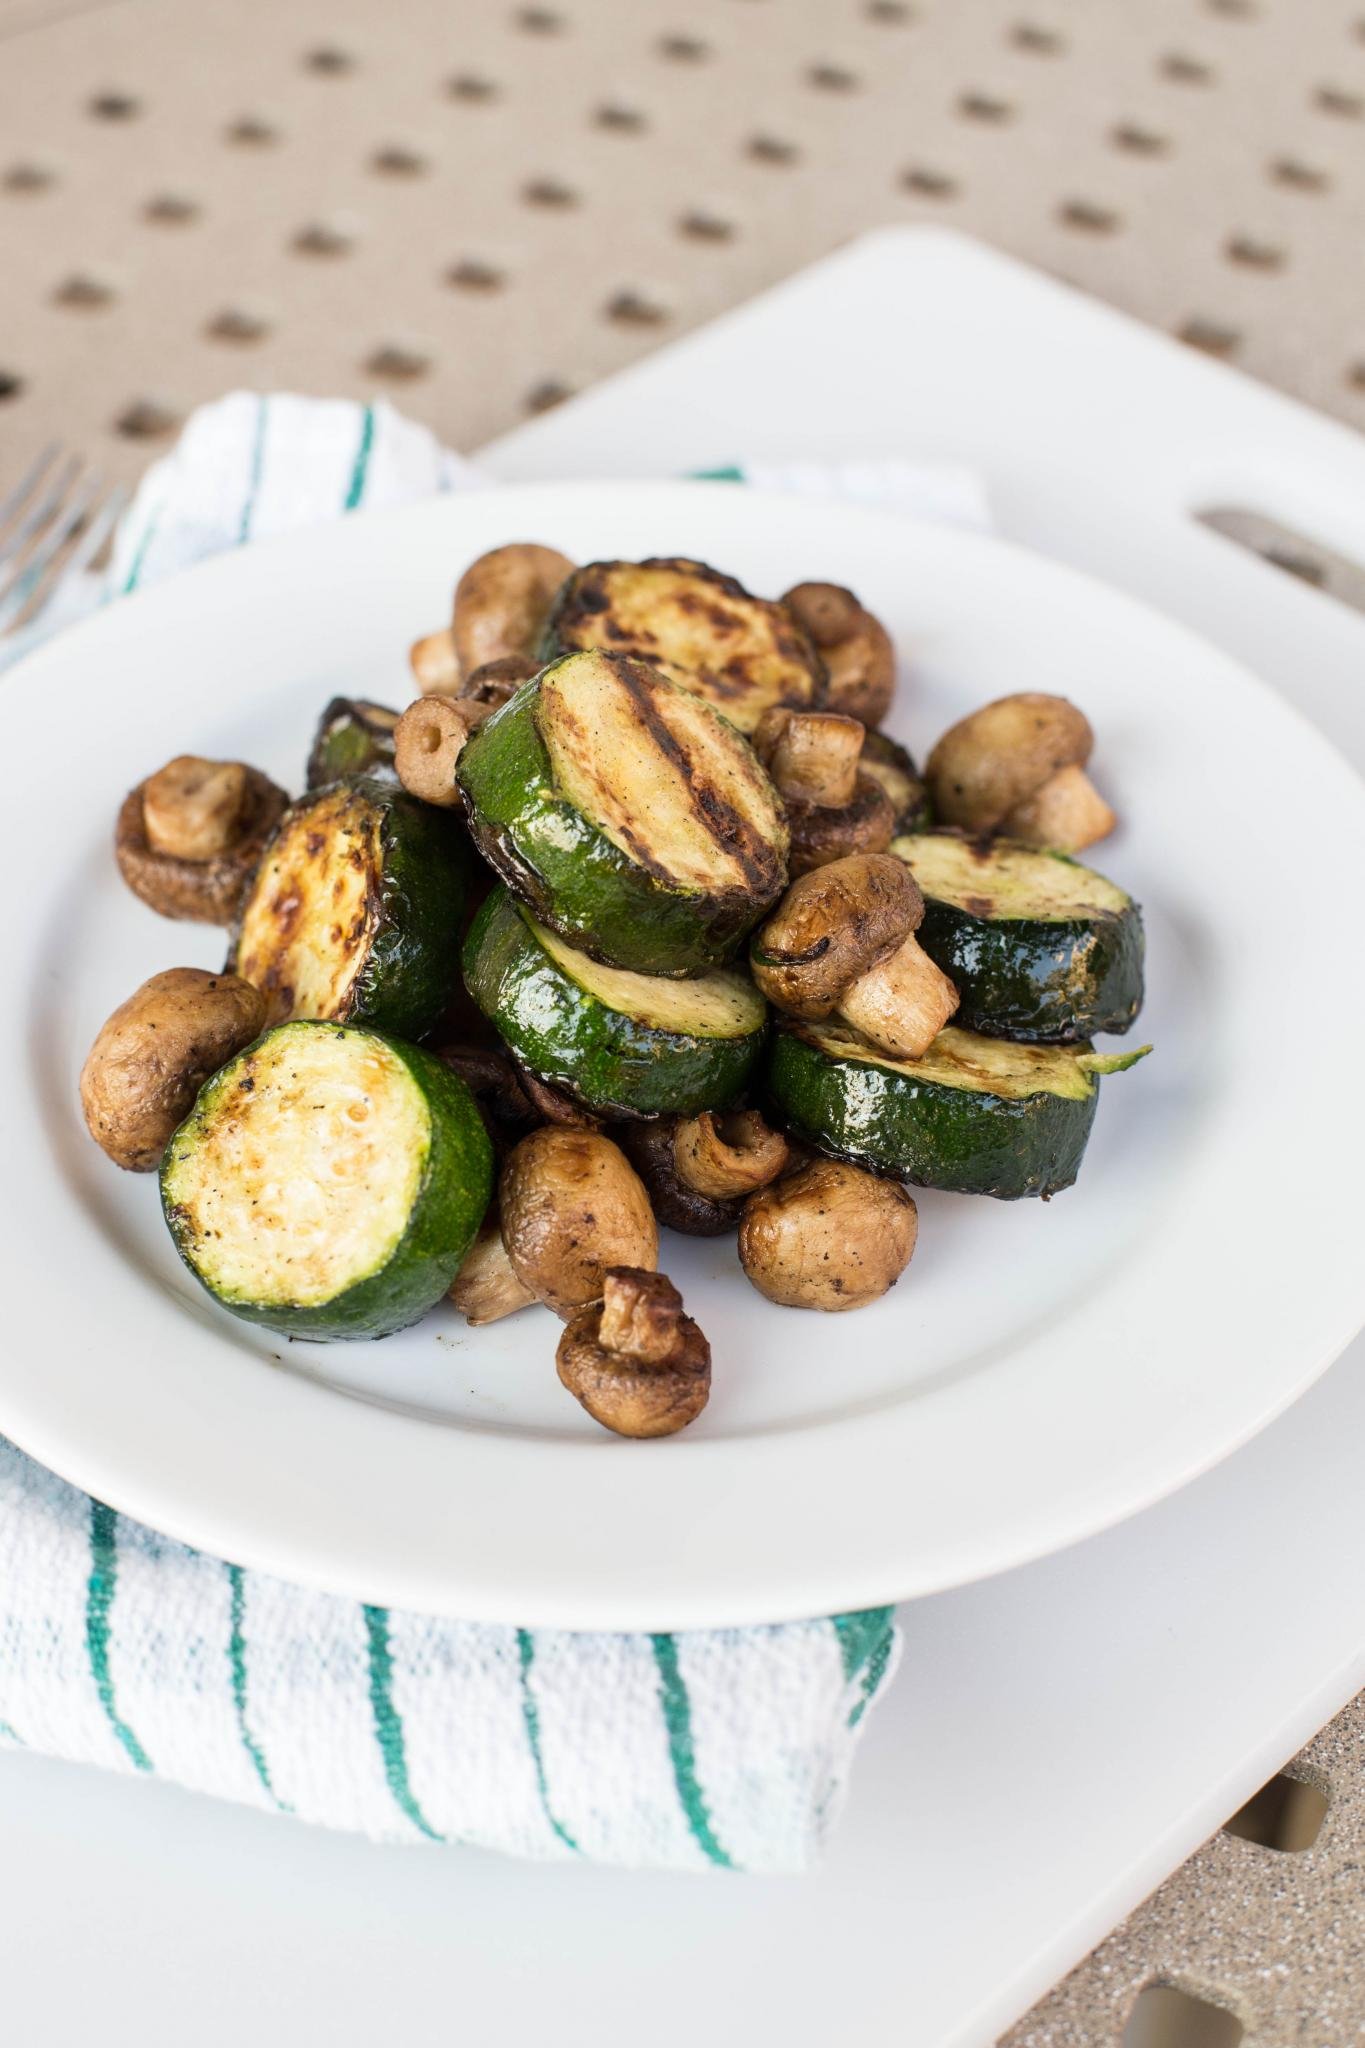 Grilled Zucchini and Mushrooms - Momsdish